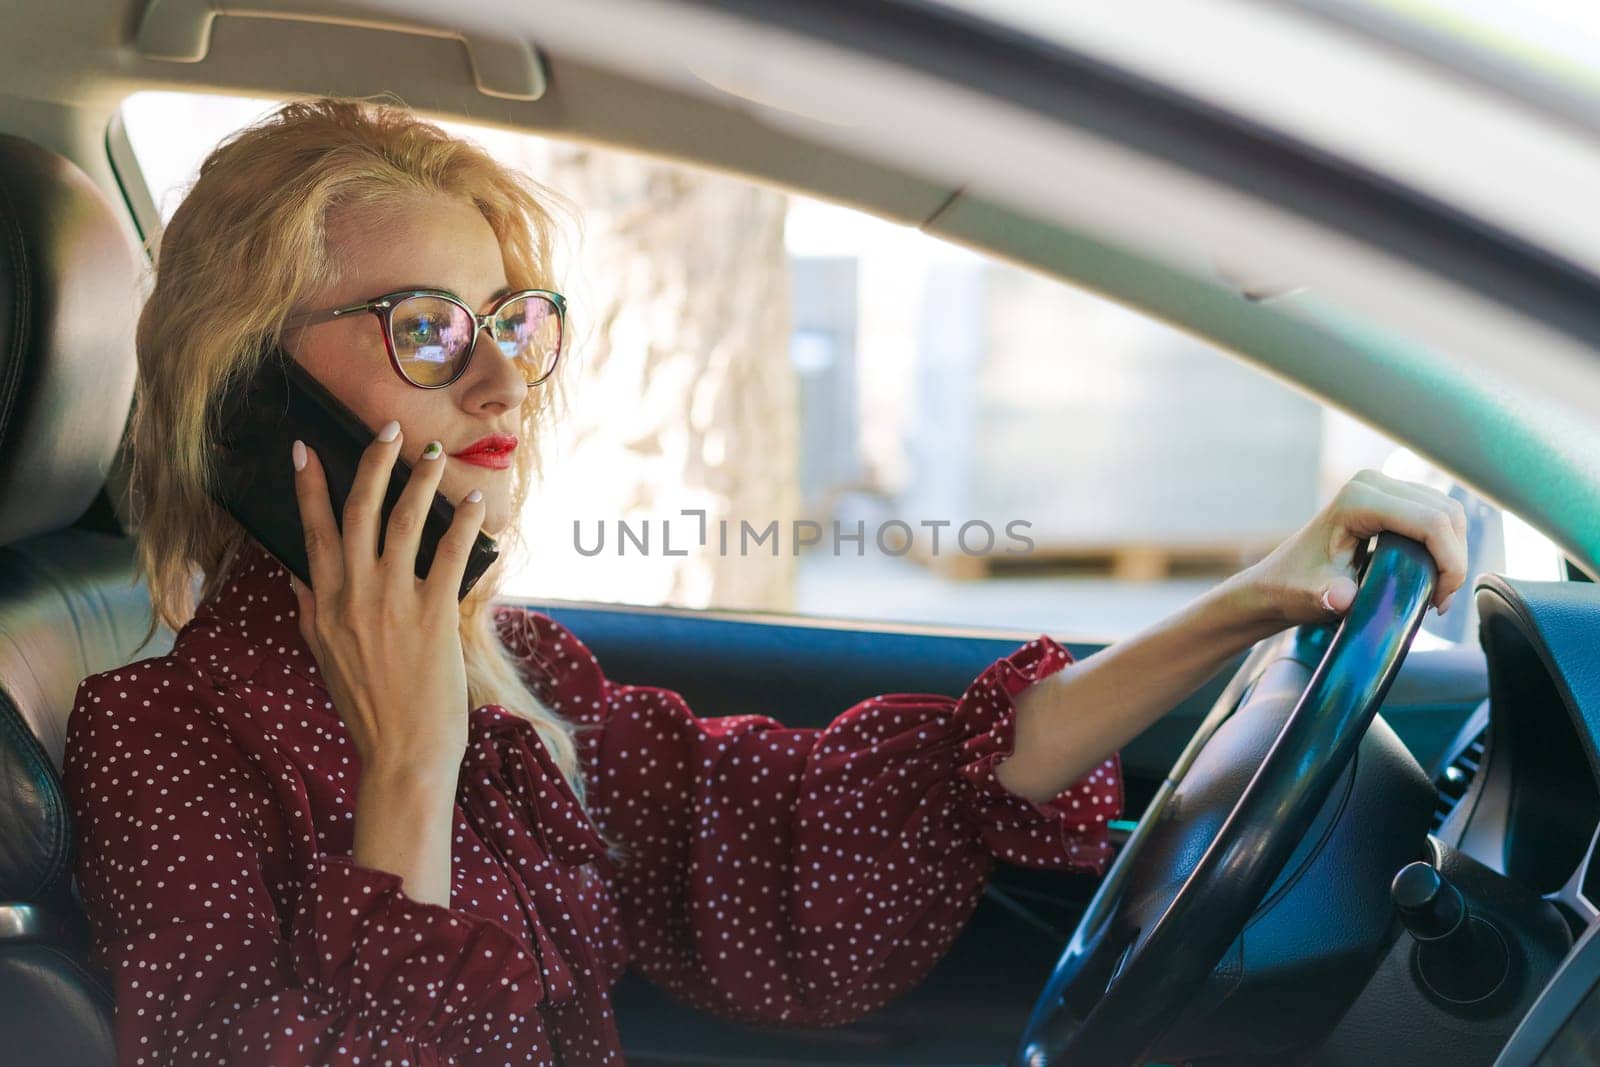 portrait of a beautiful blonde woman in a red dress sitting in a car with a phone